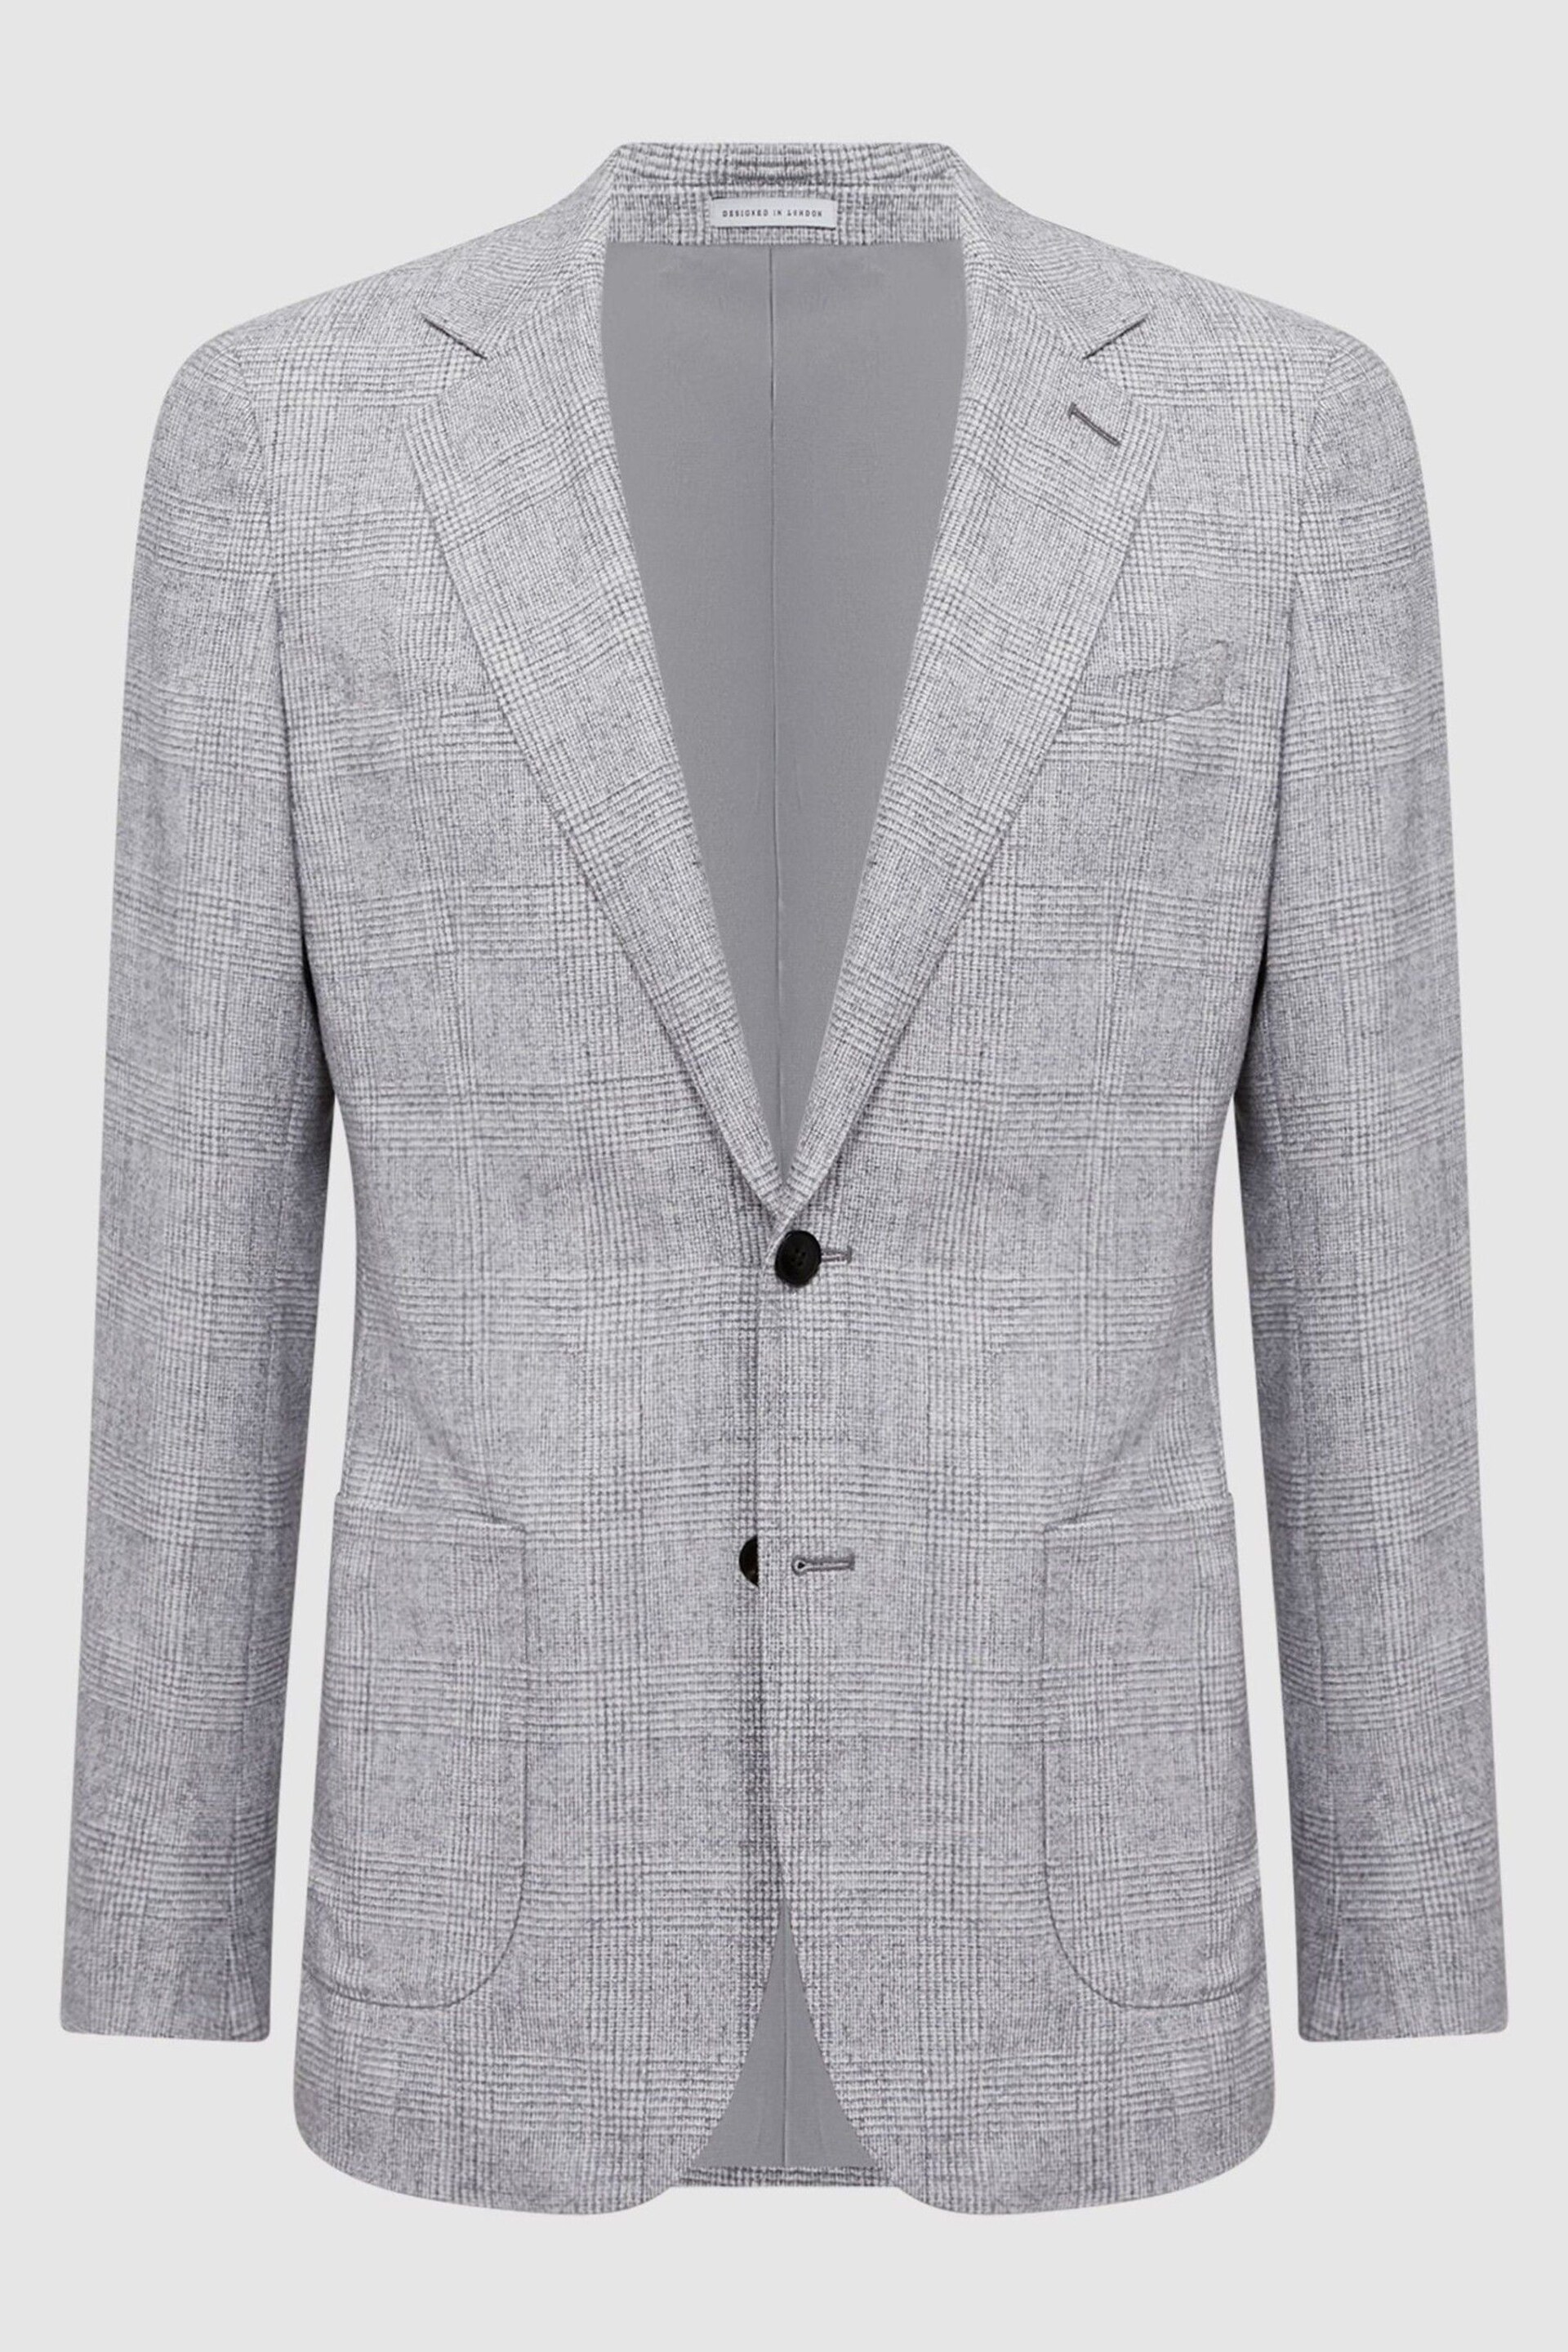 Reiss Grey Lindhurst Single Breasted Check Blazer - Image 2 of 6